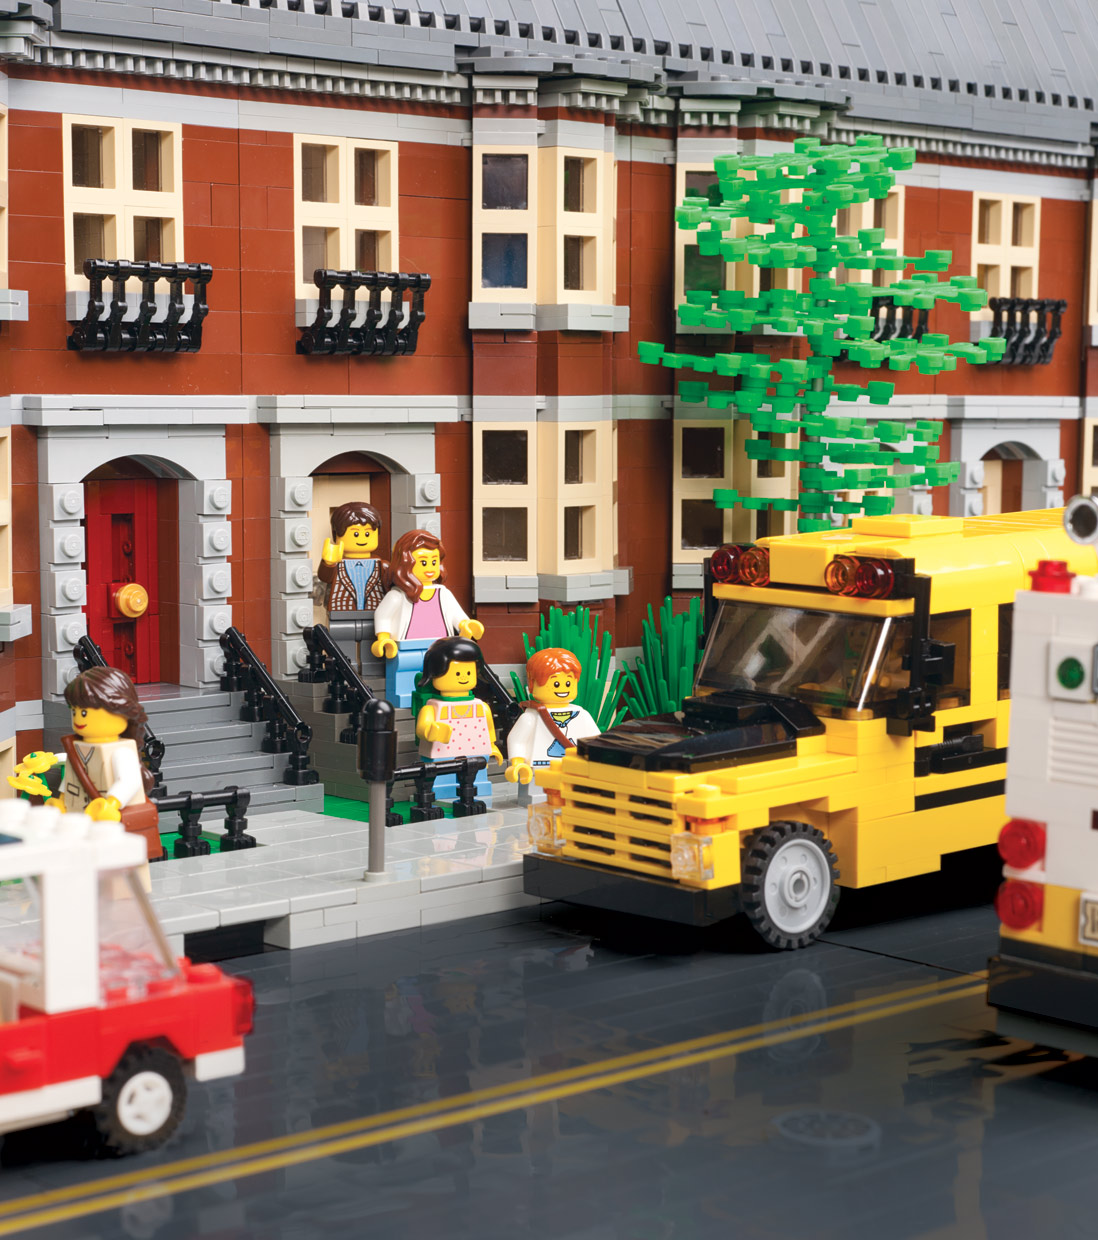 model by david eaton and jonathan dallas/nelug. photograph by Jérôme Eno. LEGO, Brick and Knob configurations, and Minifigure are trademarked products of the LEGO Group, which is not affiliated with  Boston  magazine.